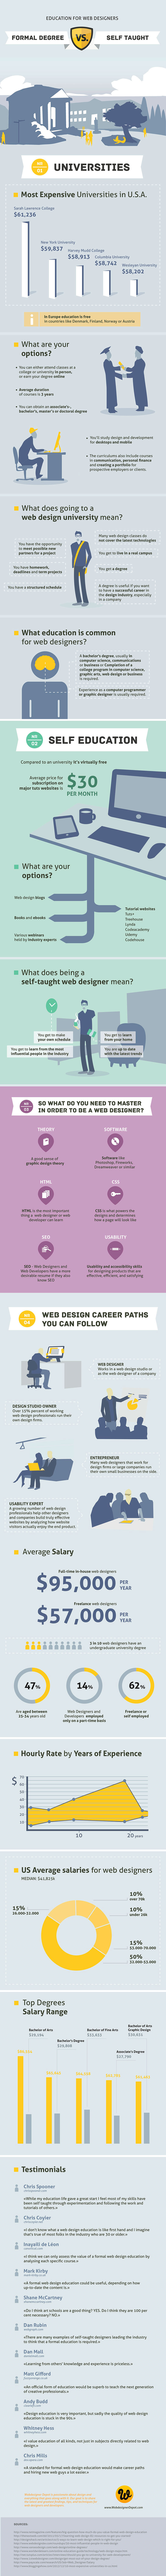 Education for web designers